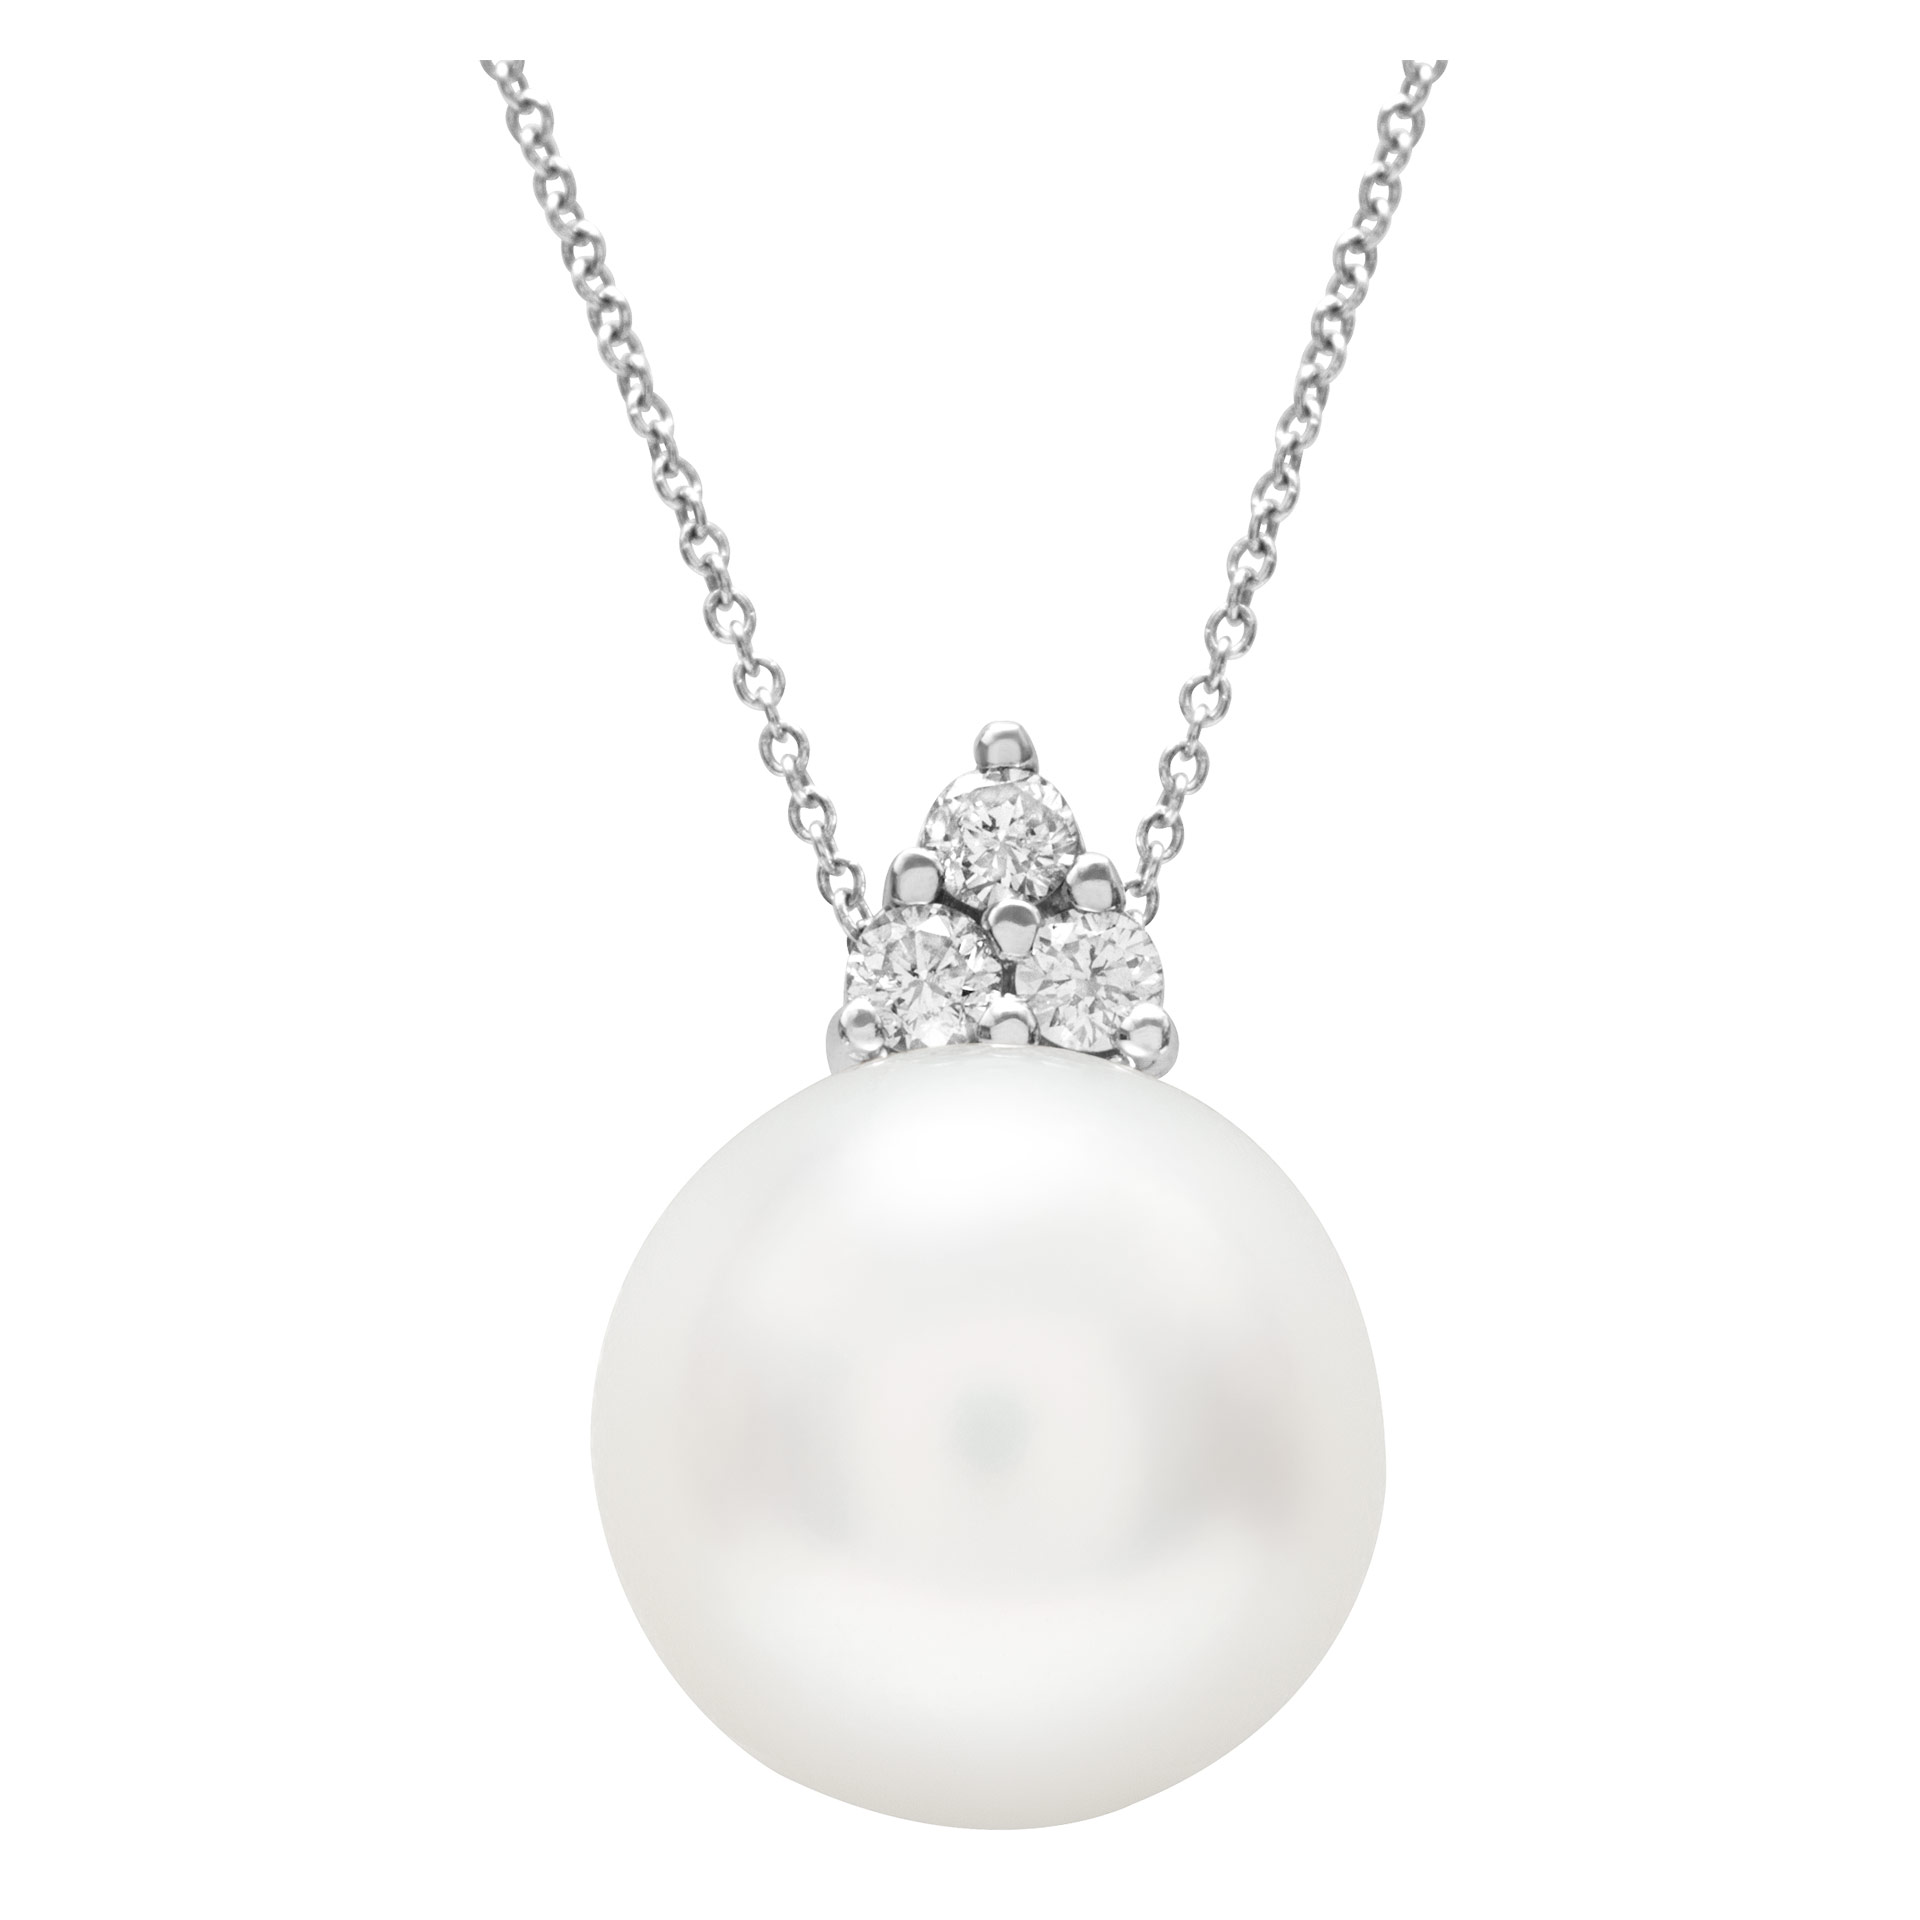 South Sea pearl pendant necklace with diamond accents.